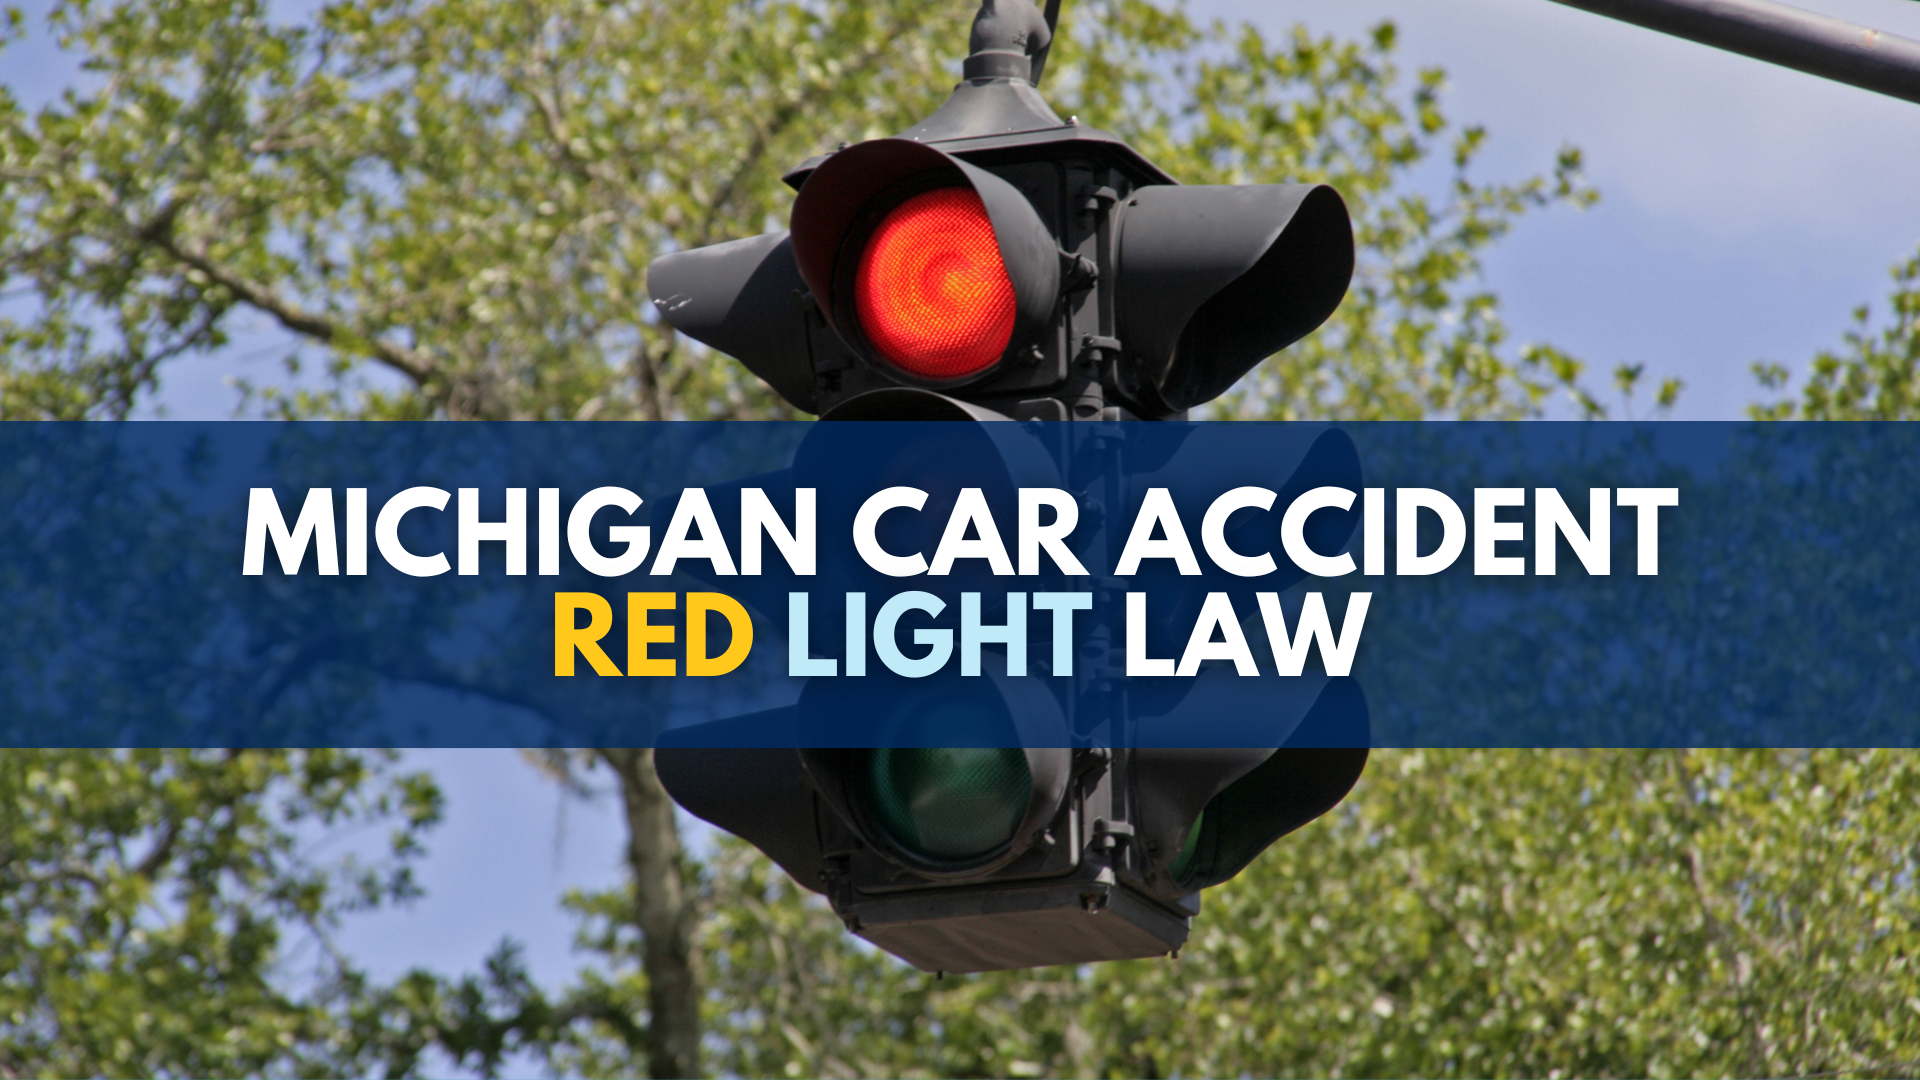 Michigan Car Accident Red Light Law: Your Legal Rights Explained